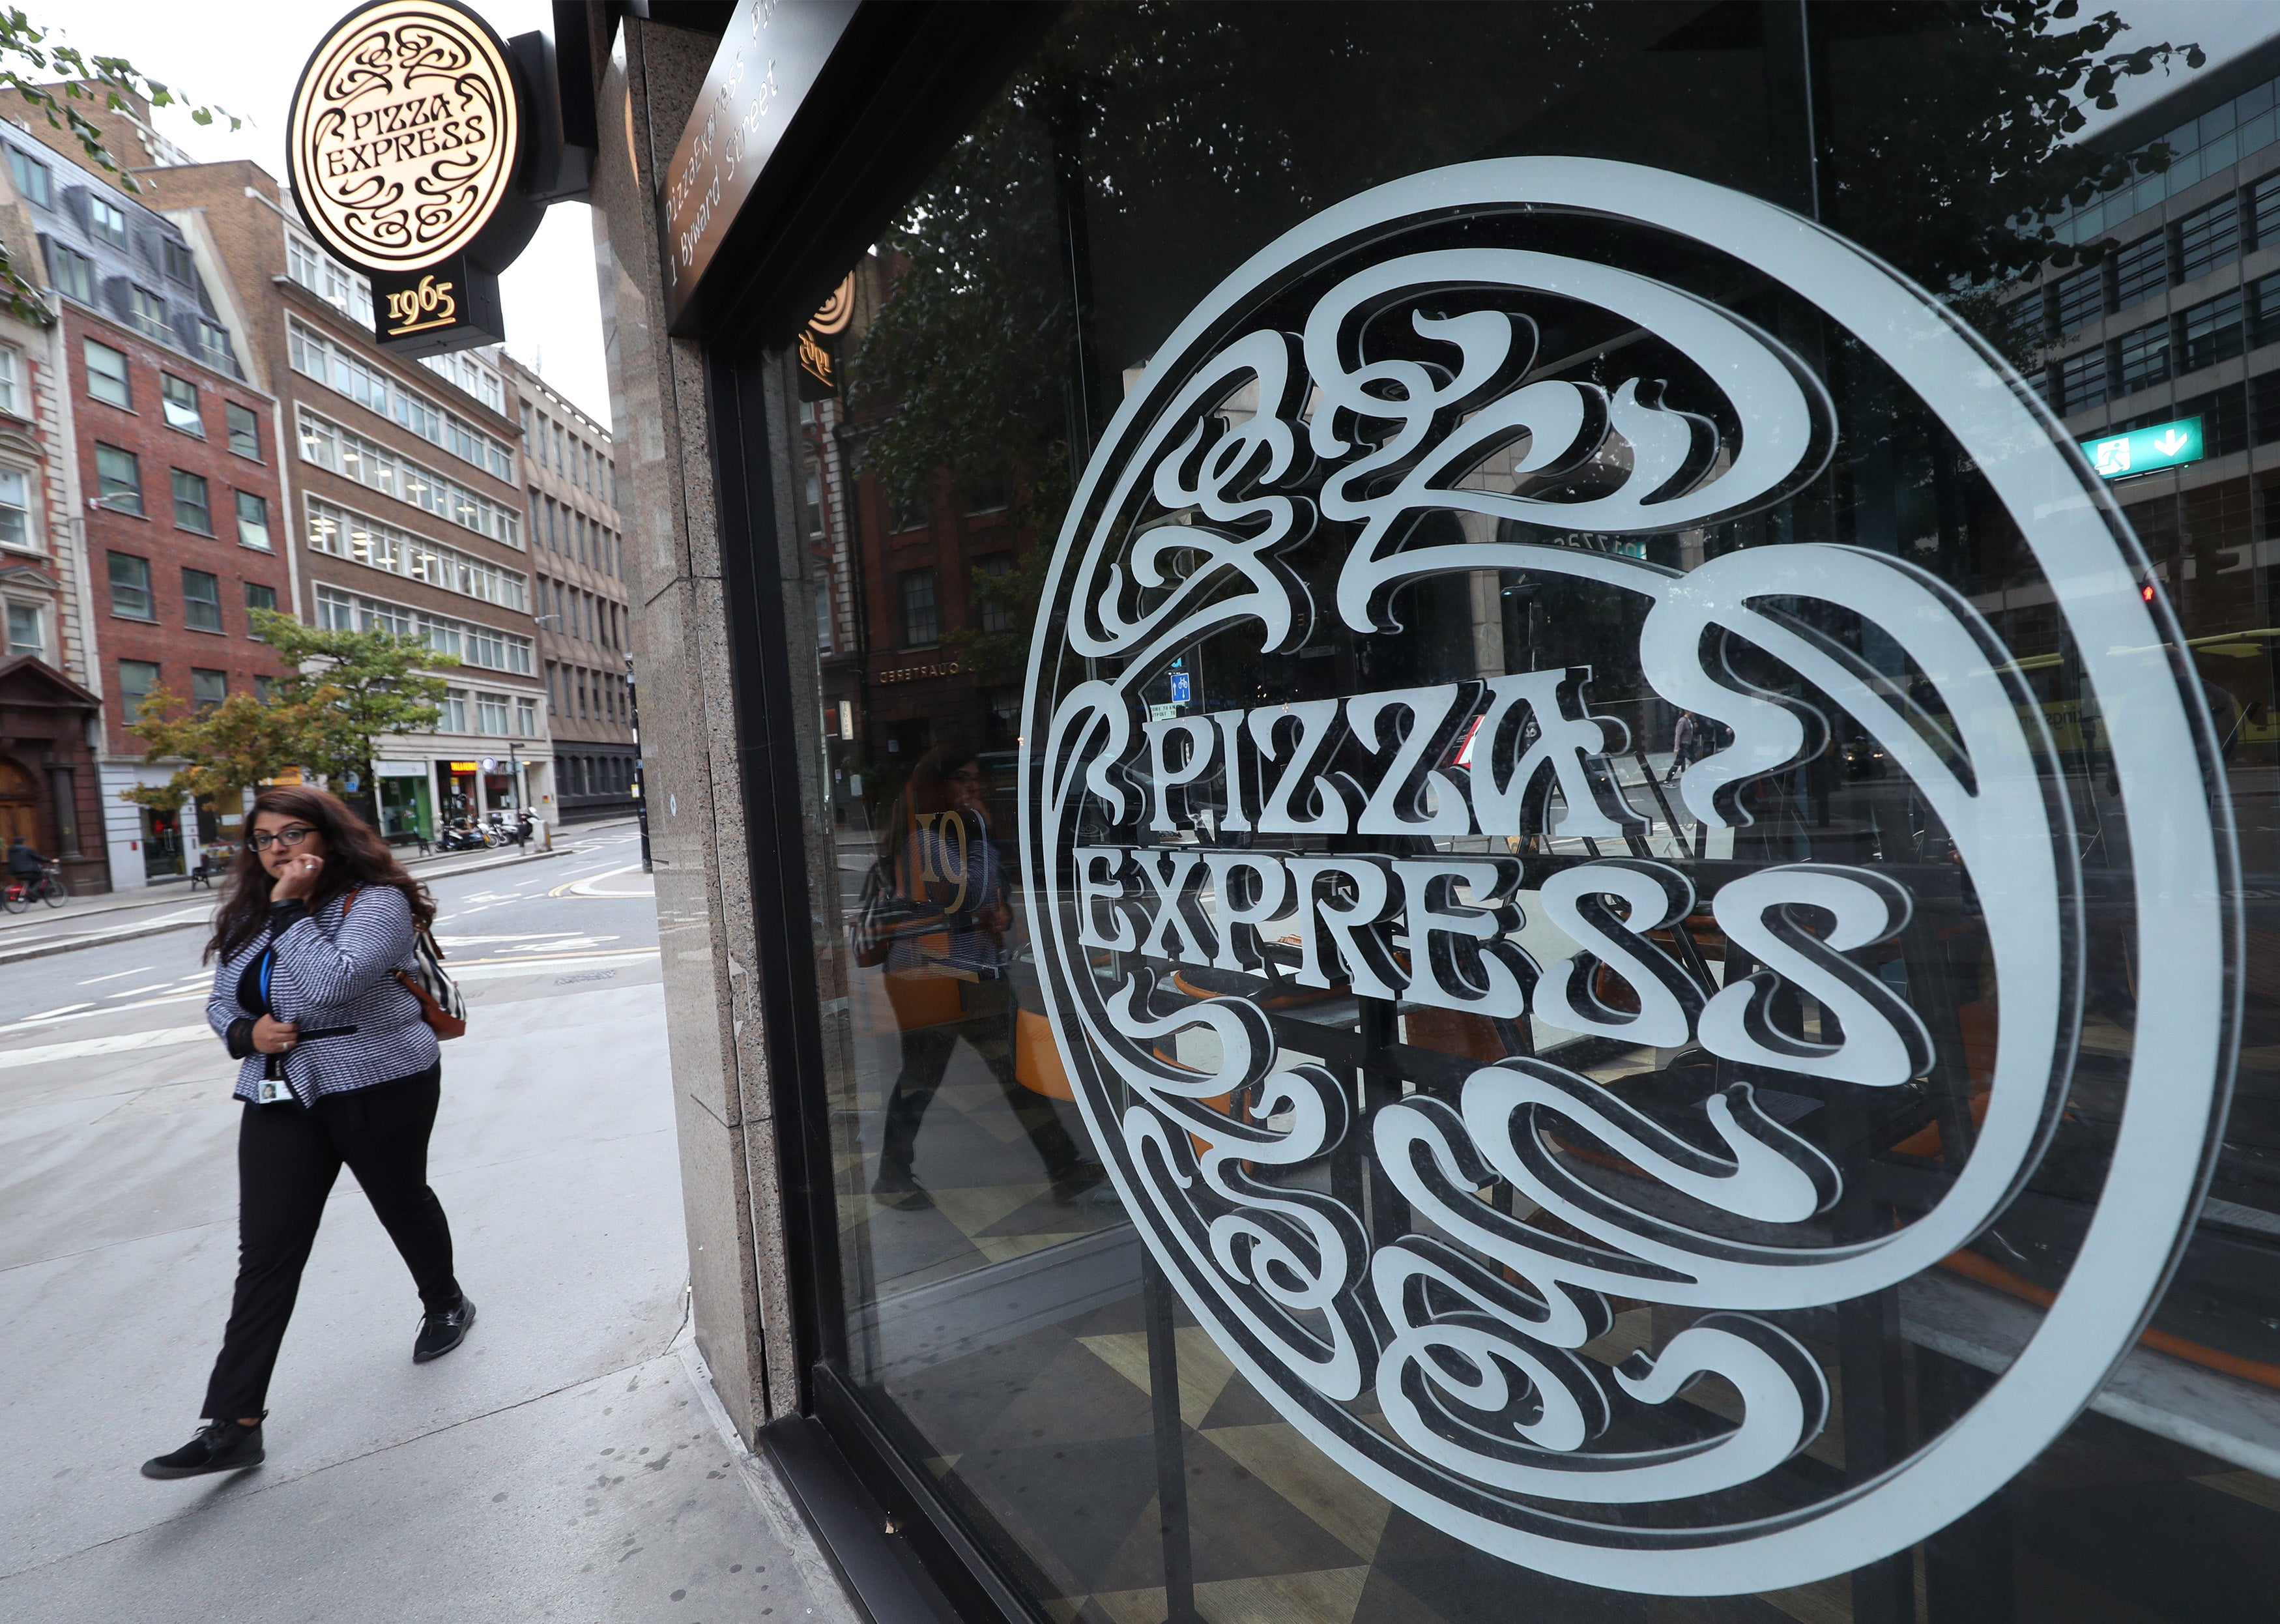 Pizza Express concluded a £335 million refinancing in July (PA)